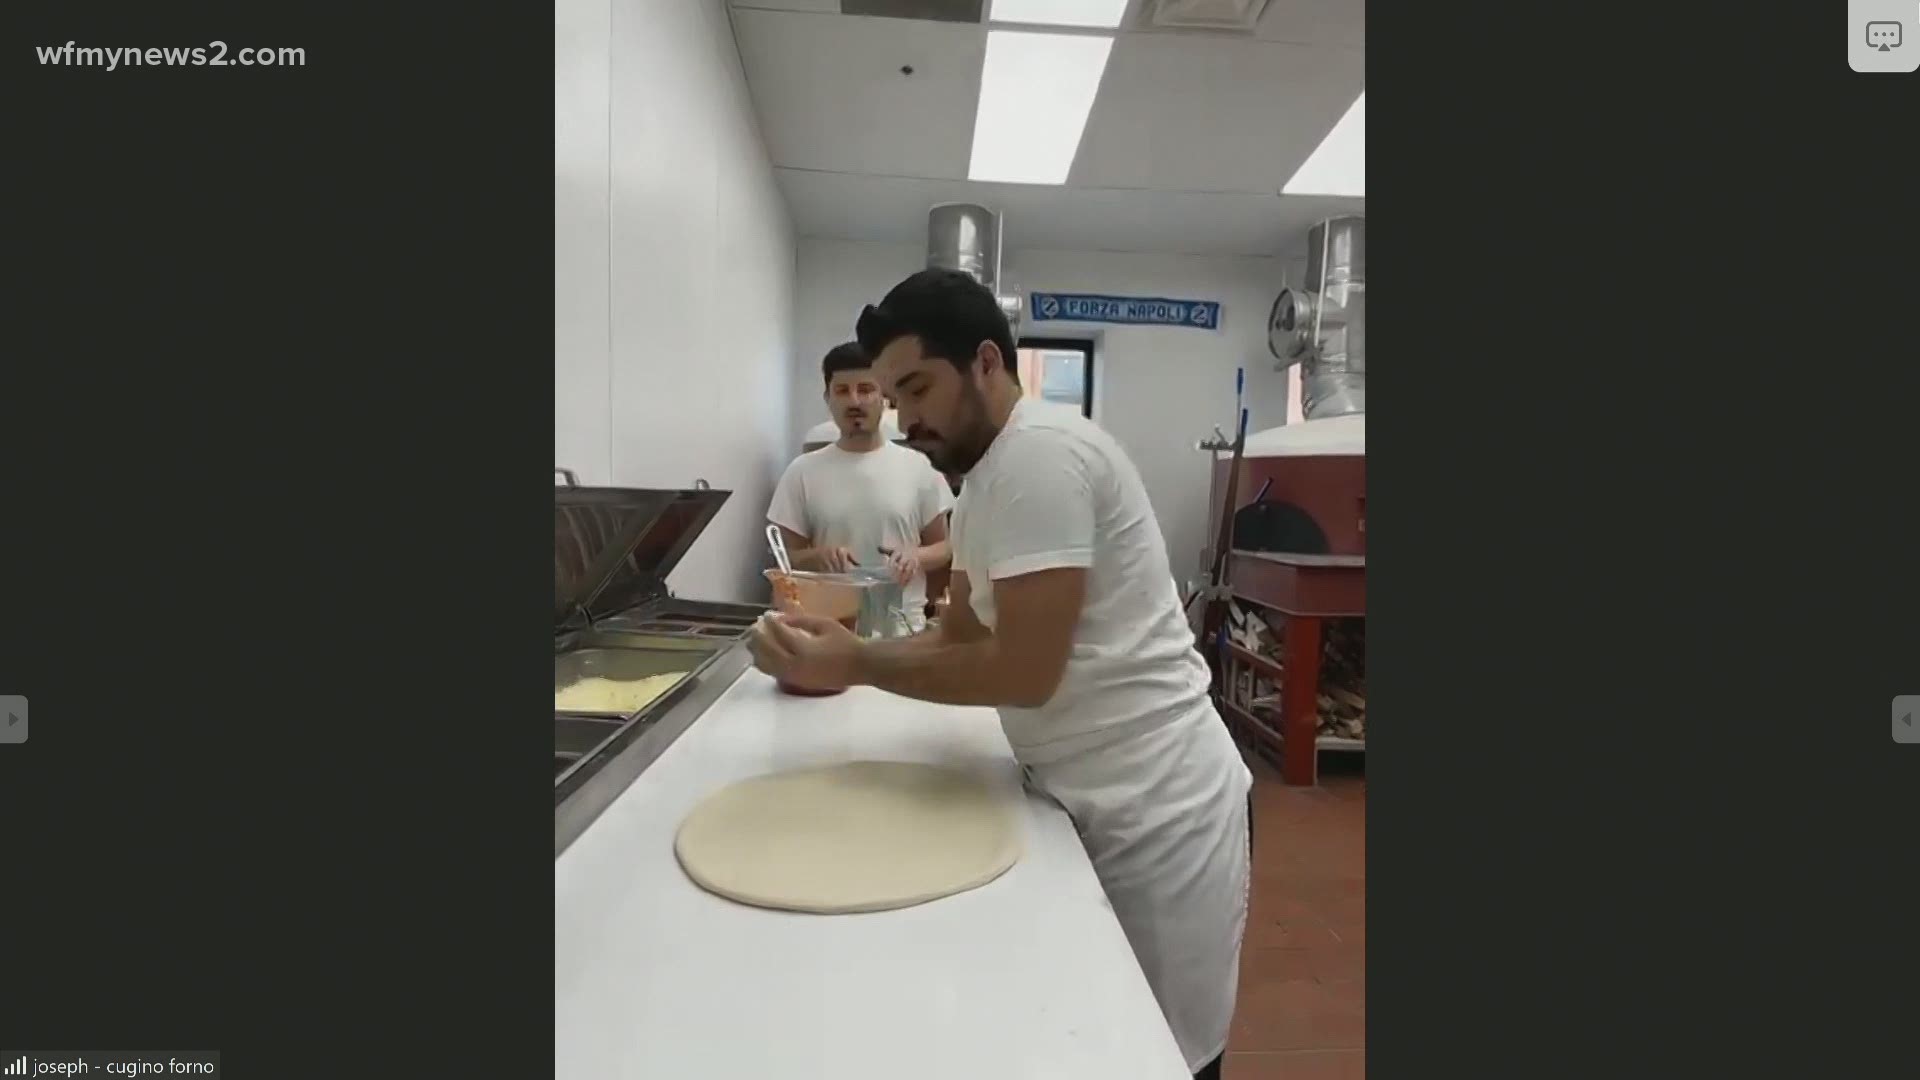 Who needs delivery,  when you could just make an authentic pizza right in your kitchen! Chef Joseph with Cugino Forno shows you how.